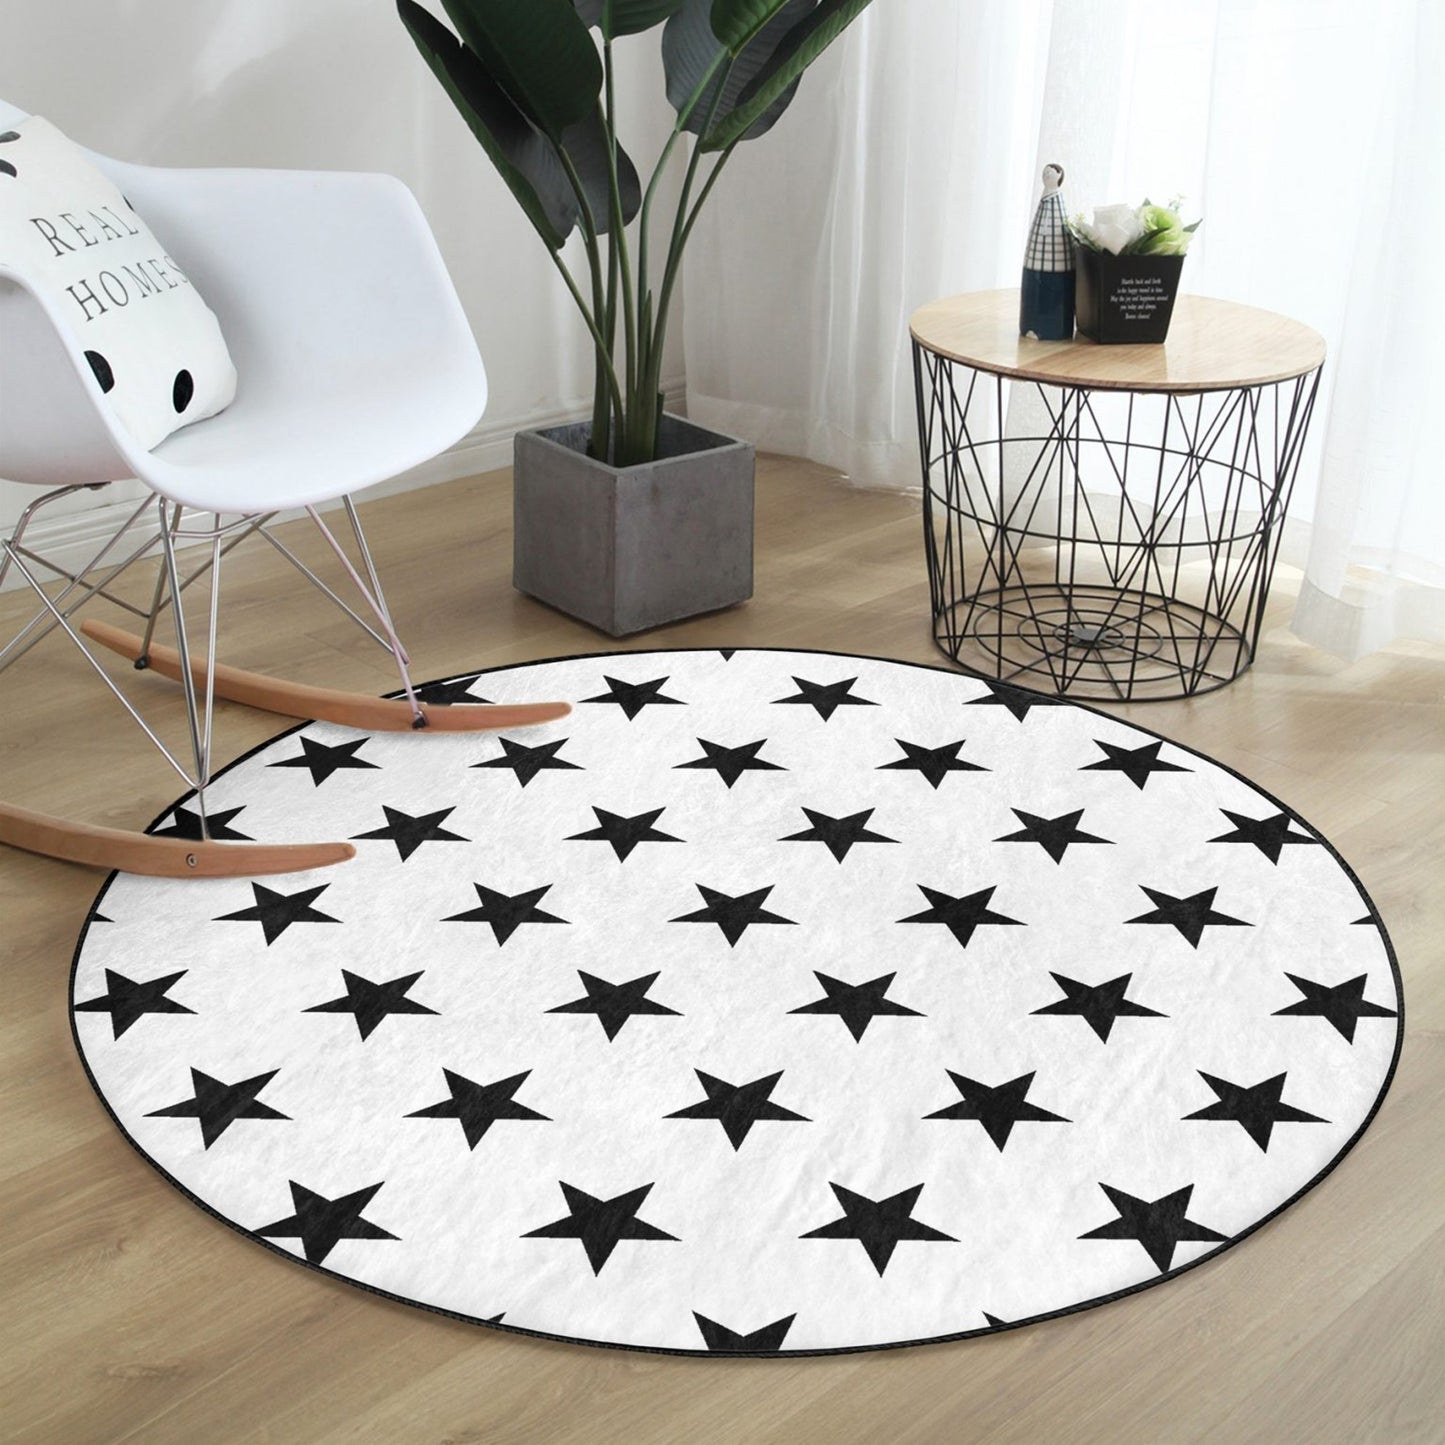 Bring the Night Sky Indoors with Stars Rug